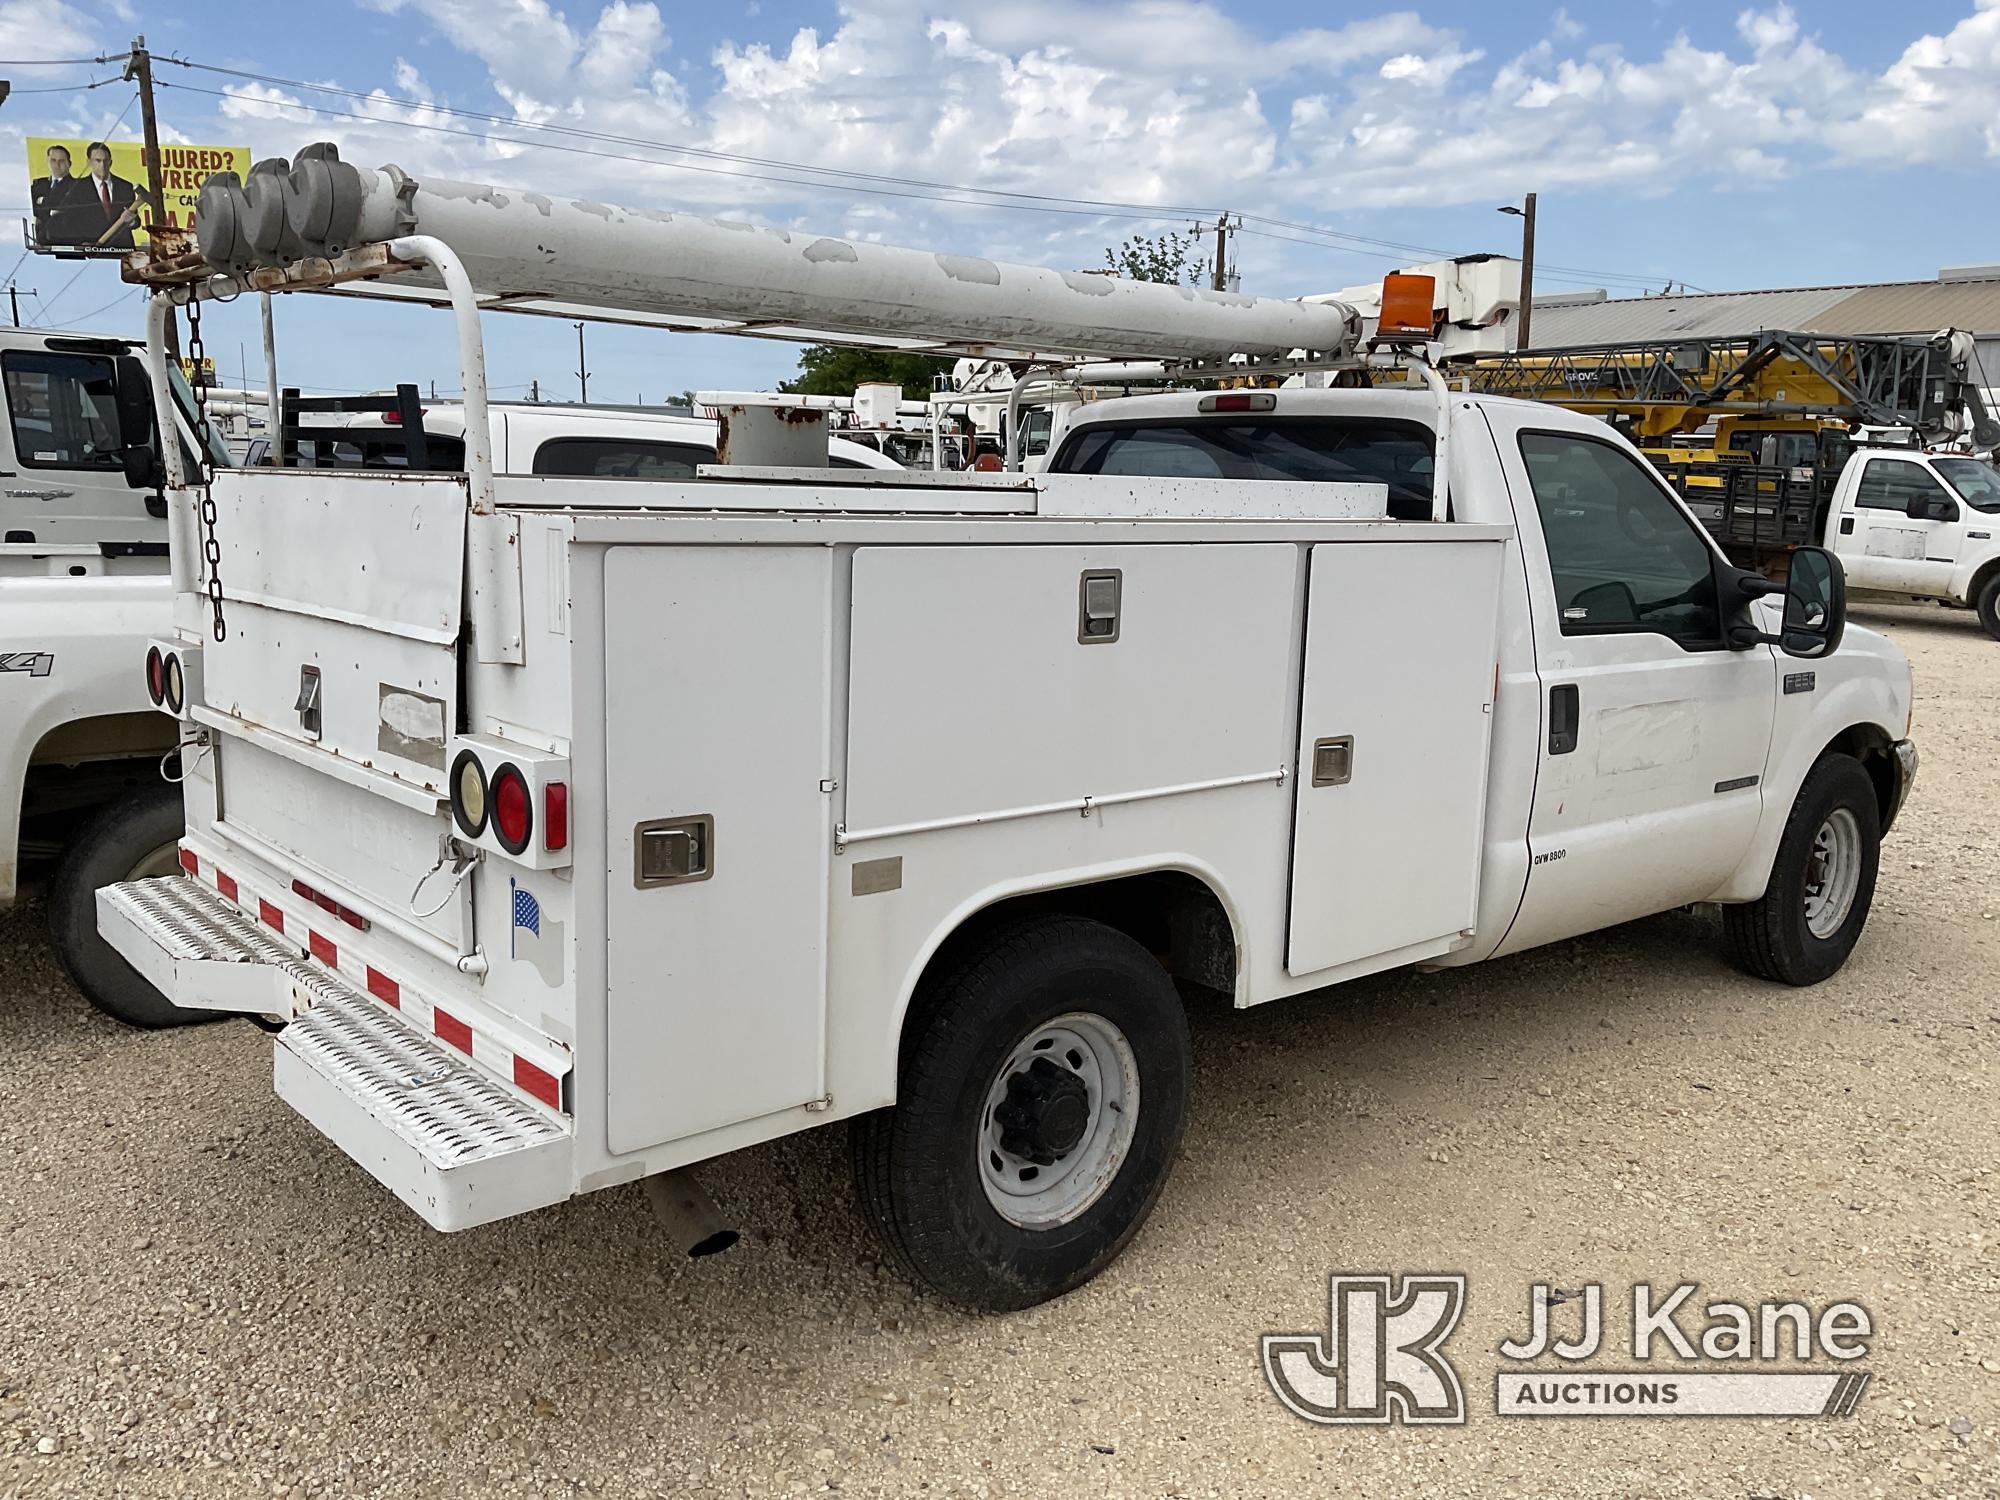 (San Antonio, TX) 2002 Ford F250 Service Truck Runs & Does Not Move) (Battery Dead and Unit Cuts Off